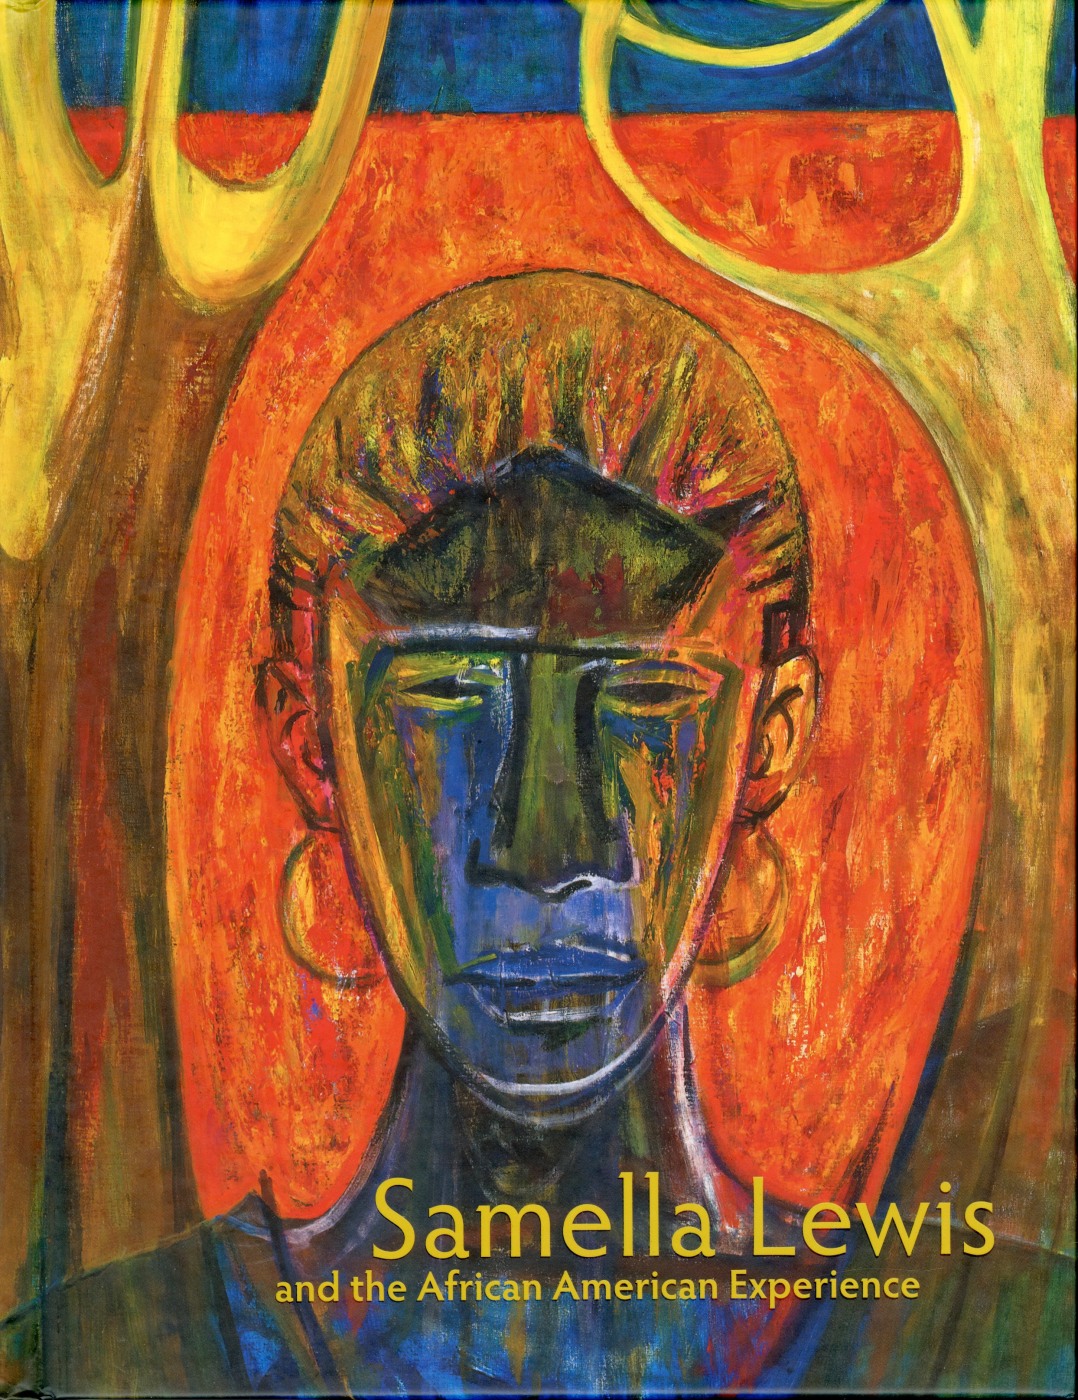 Samella Lewis and the African American Experience - Publications - Louis Stern Fine Arts